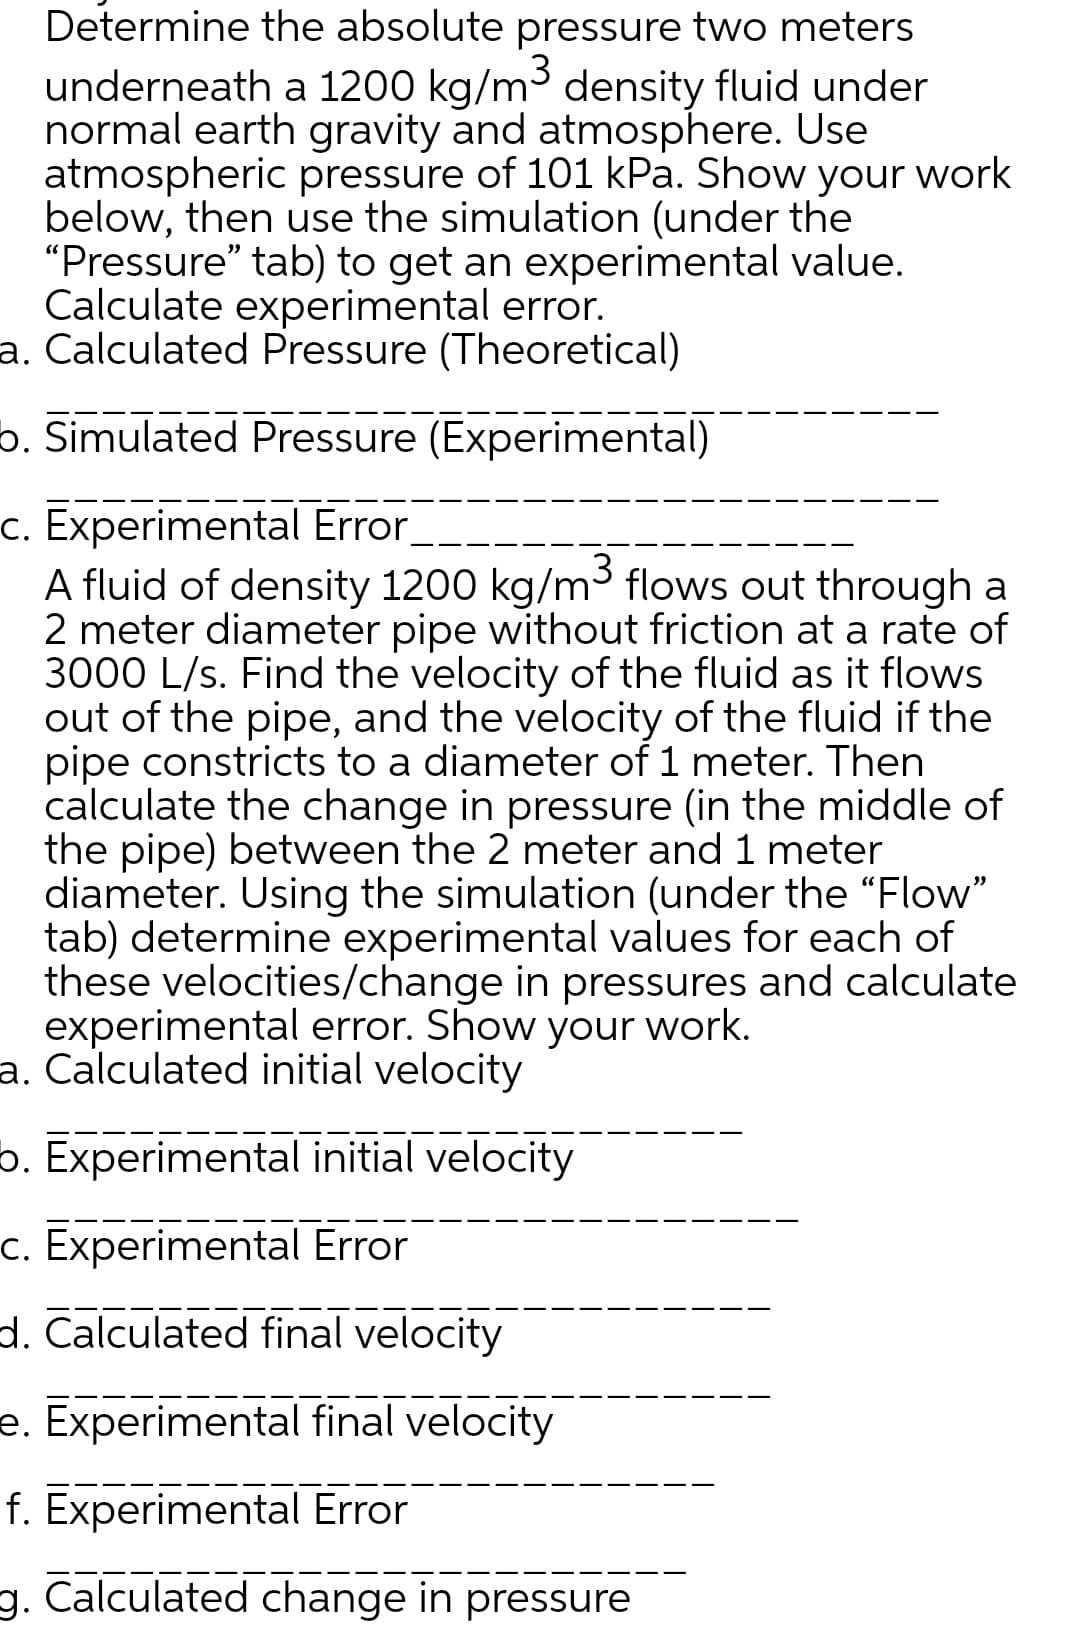 Determine the absolute pressure two meters
3
underneath a 1200 kg/m³ density fluid under
normal earth gravity and atmosphere. Use
atmospheric pressure of 101 kPa. Show your work
below, then use the simulation (under the
"Pressure" tab) to get an experimental
Calculate experimental error.
value.
a. Calculated Pressure (Theoretical)
b. Simulated Pressure (Experimental)
c. Experimental Error
A fluid of density 1200 kg/m³ flows out through a
2 meter diameter pipe without friction at a rate of
3000 L/s. Find the velocity of the fluid as it flows
out of the pipe, and the velocity of the fluid if the
pipe constricts to a diameter of 1 meter. Then
calculate the change in pressure (in the middle of
the pipe) between the 2 meter and 1 meter
diameter. Using the simulation (under the "Flow"
tab) determine experimental values for each of
these velocities/change in pressures and calculate
experimental error. Show your work.
a. Calculated initial velocity
b. Experimental initial velocity
c. Experimental Error
d. Calculated final velocity
e. Experimental final velocity
f. Experimental Error
g. Calculated change in pressure